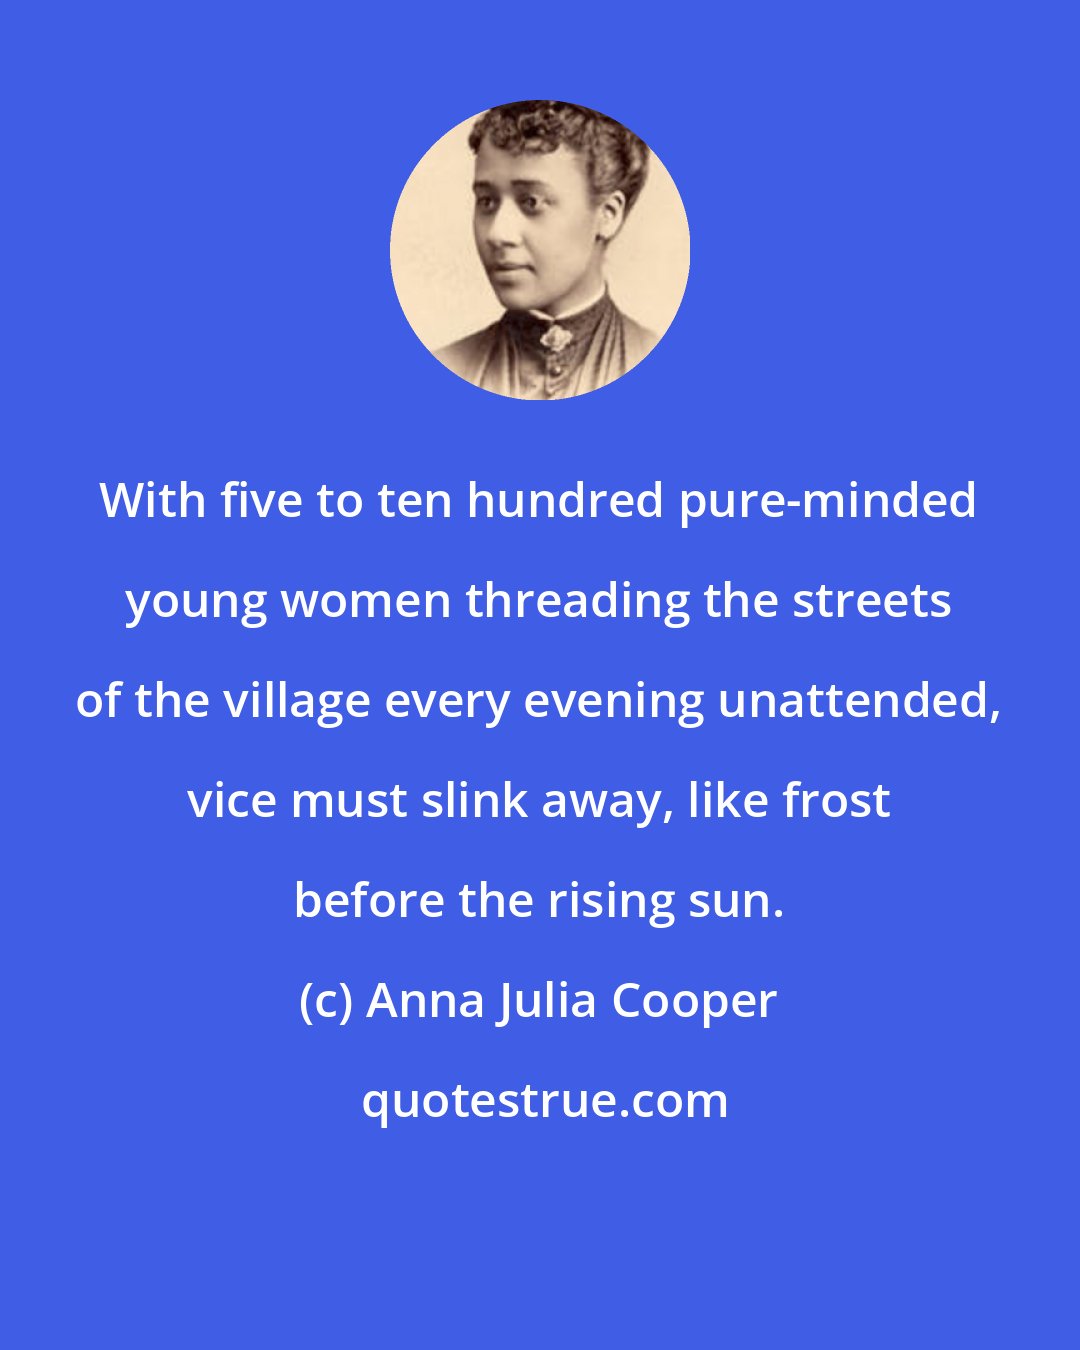 Anna Julia Cooper: With five to ten hundred pure-minded young women threading the streets of the village every evening unattended, vice must slink away, like frost before the rising sun.